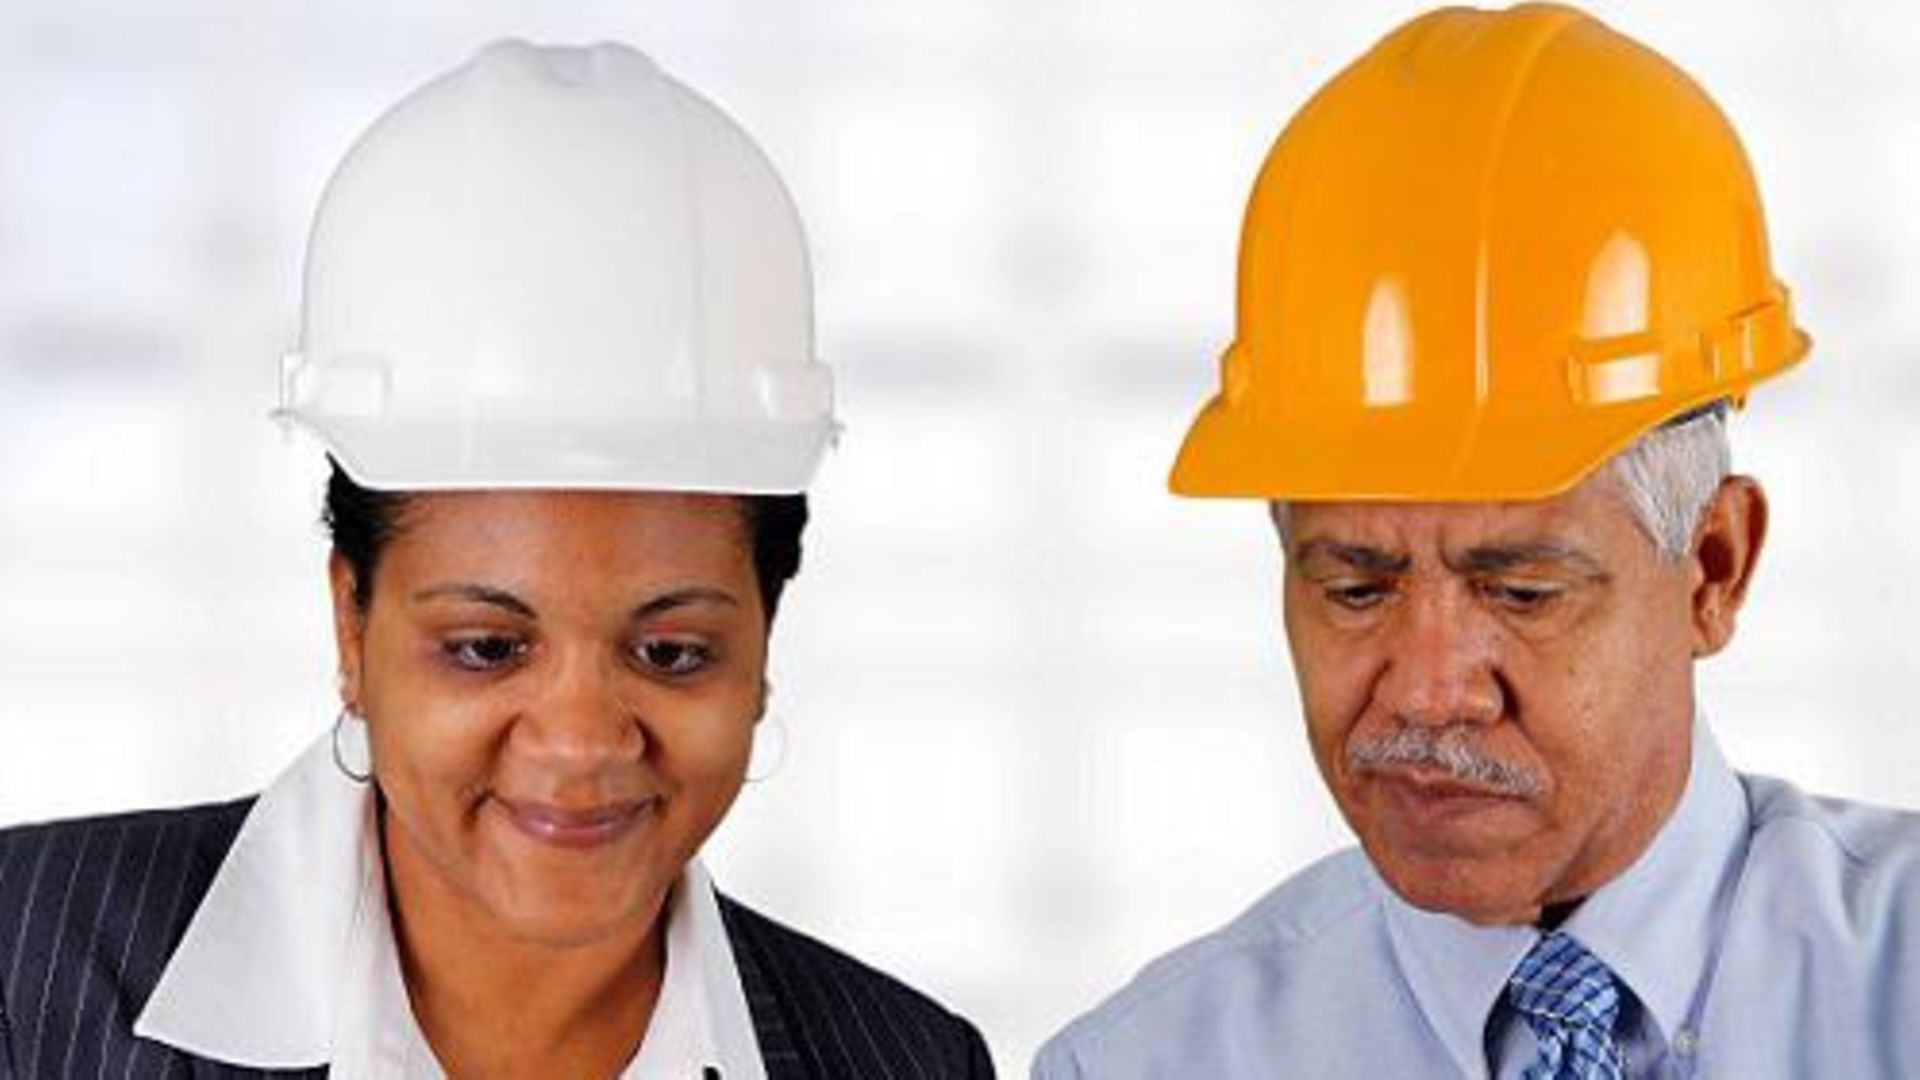 Two civil engineers from DB Engineering & Consulting with protective helmets on their heads are studying construction plans